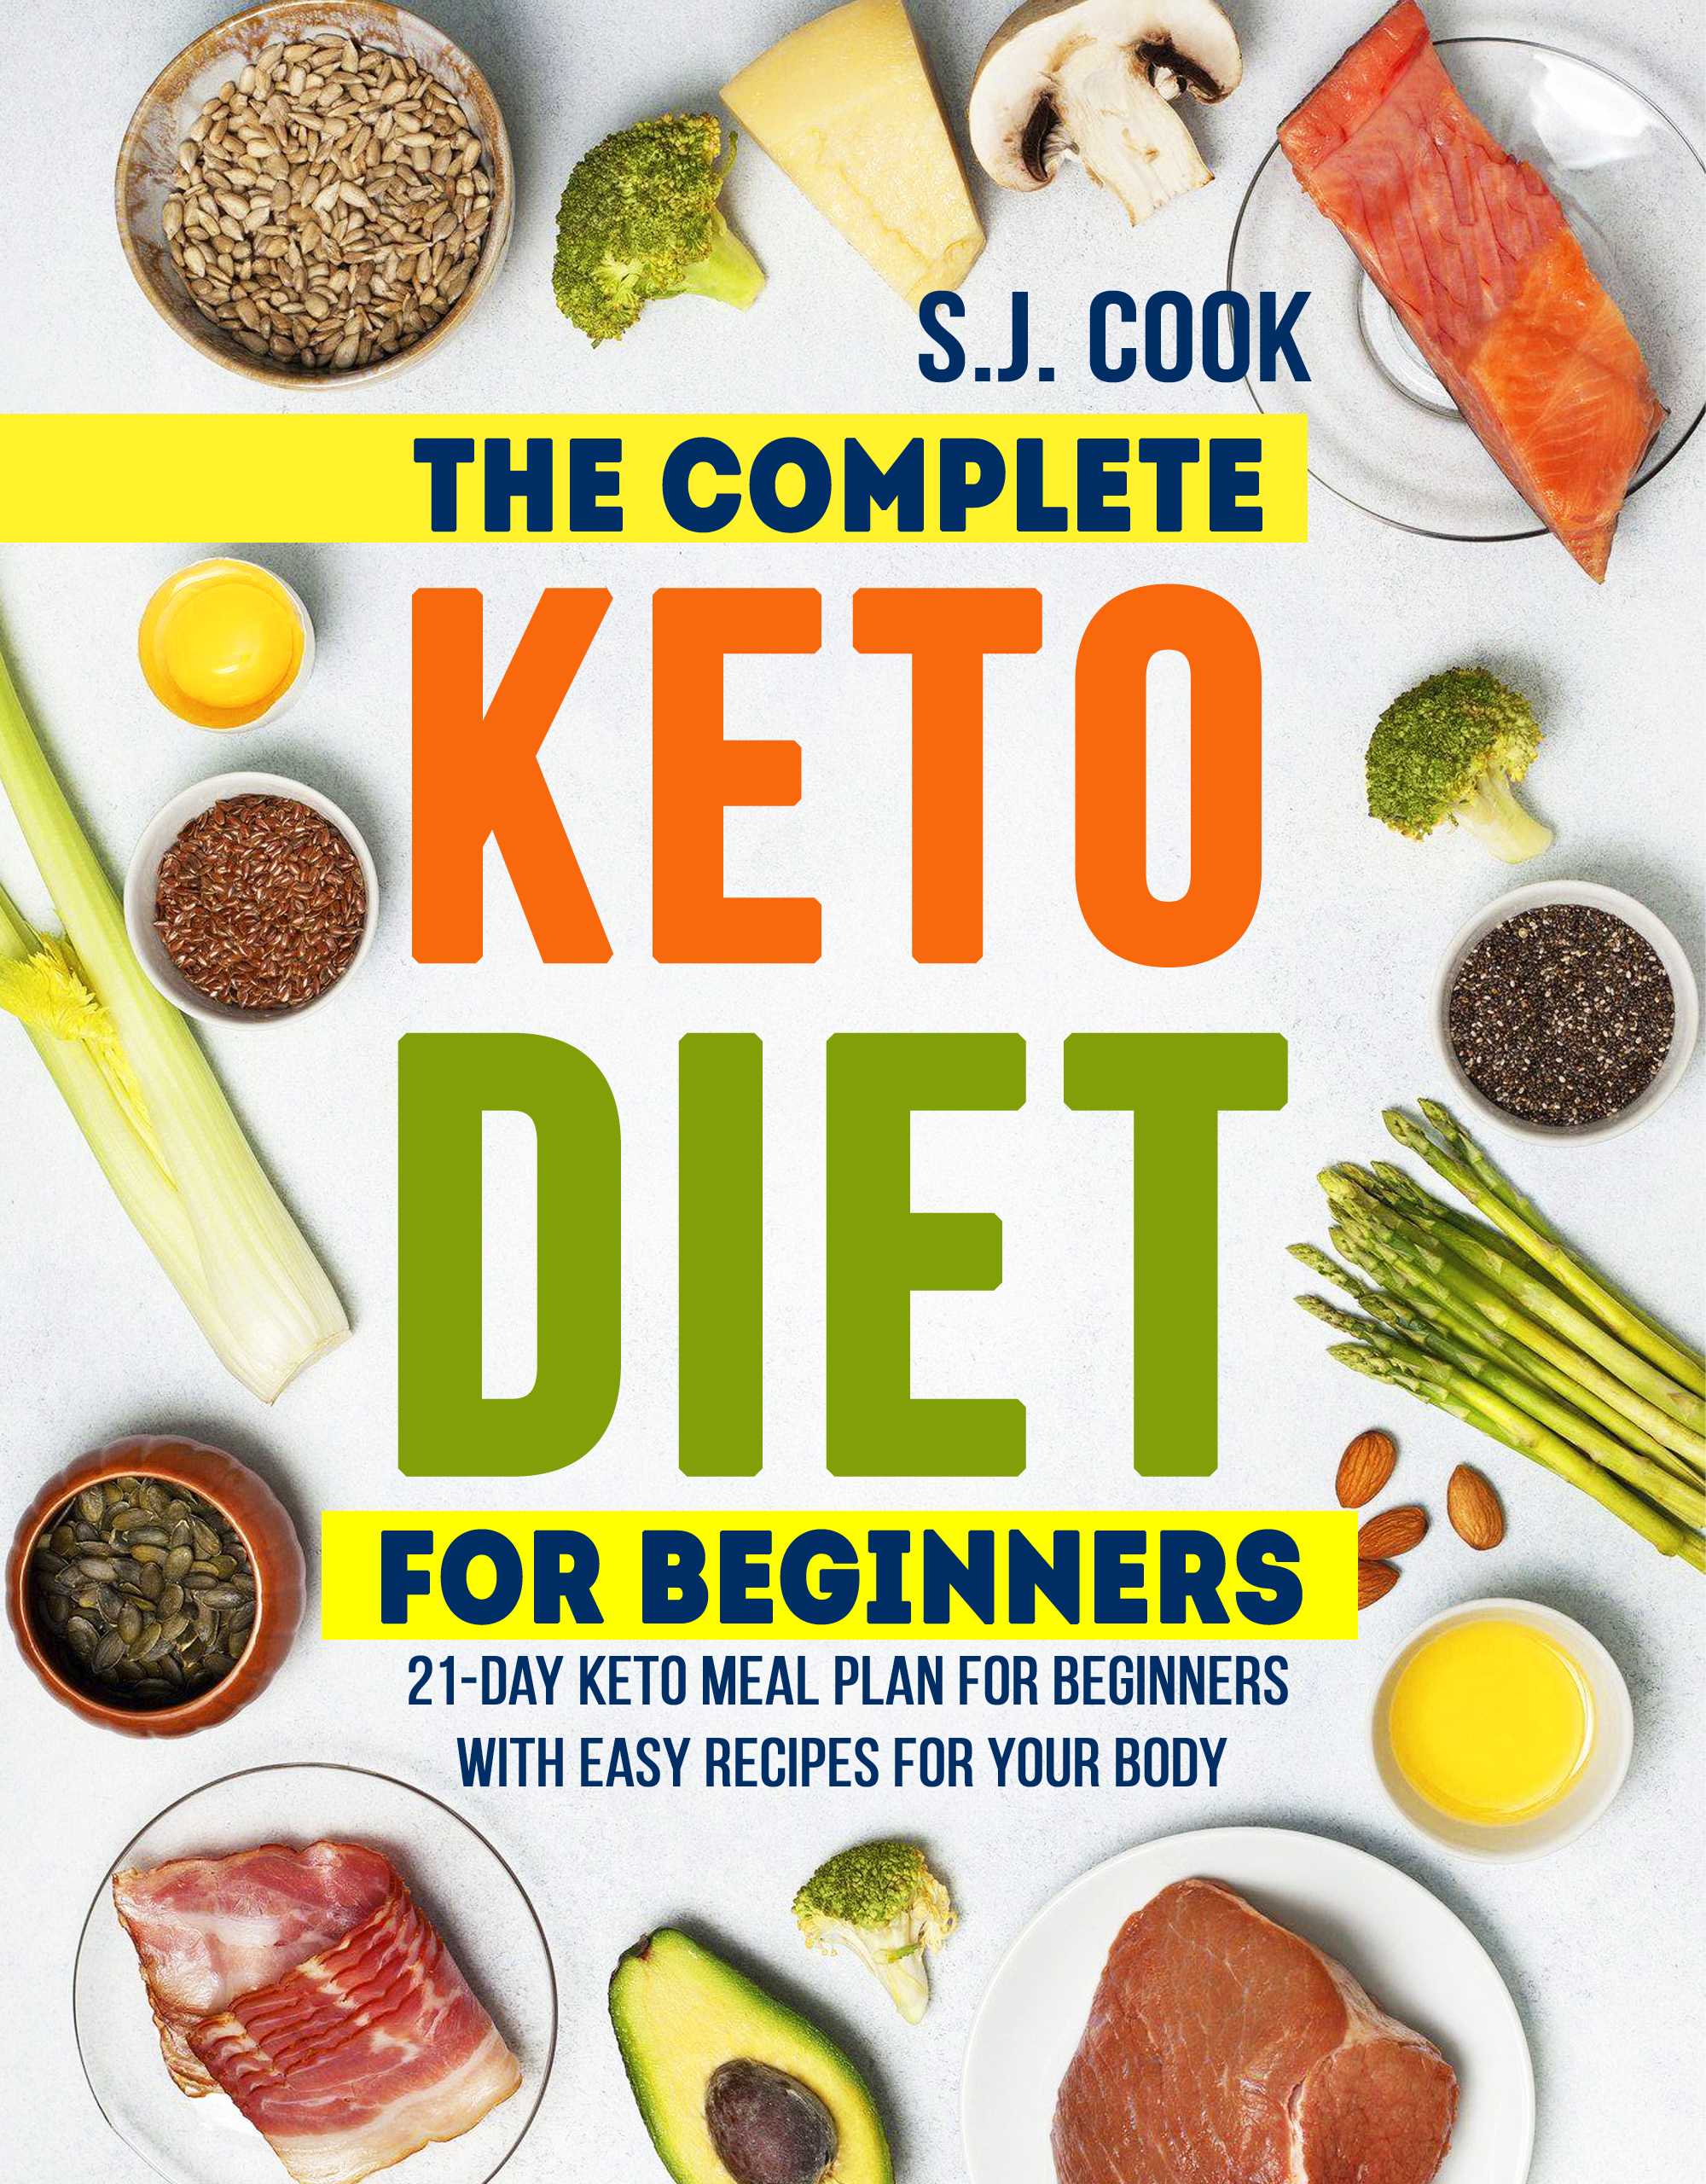 FREE: The Complete Keto Diet for Beginners: 21-Day Keto Meal Plan for Beginners With Easy Recipes for Your Body by S.J. Cook